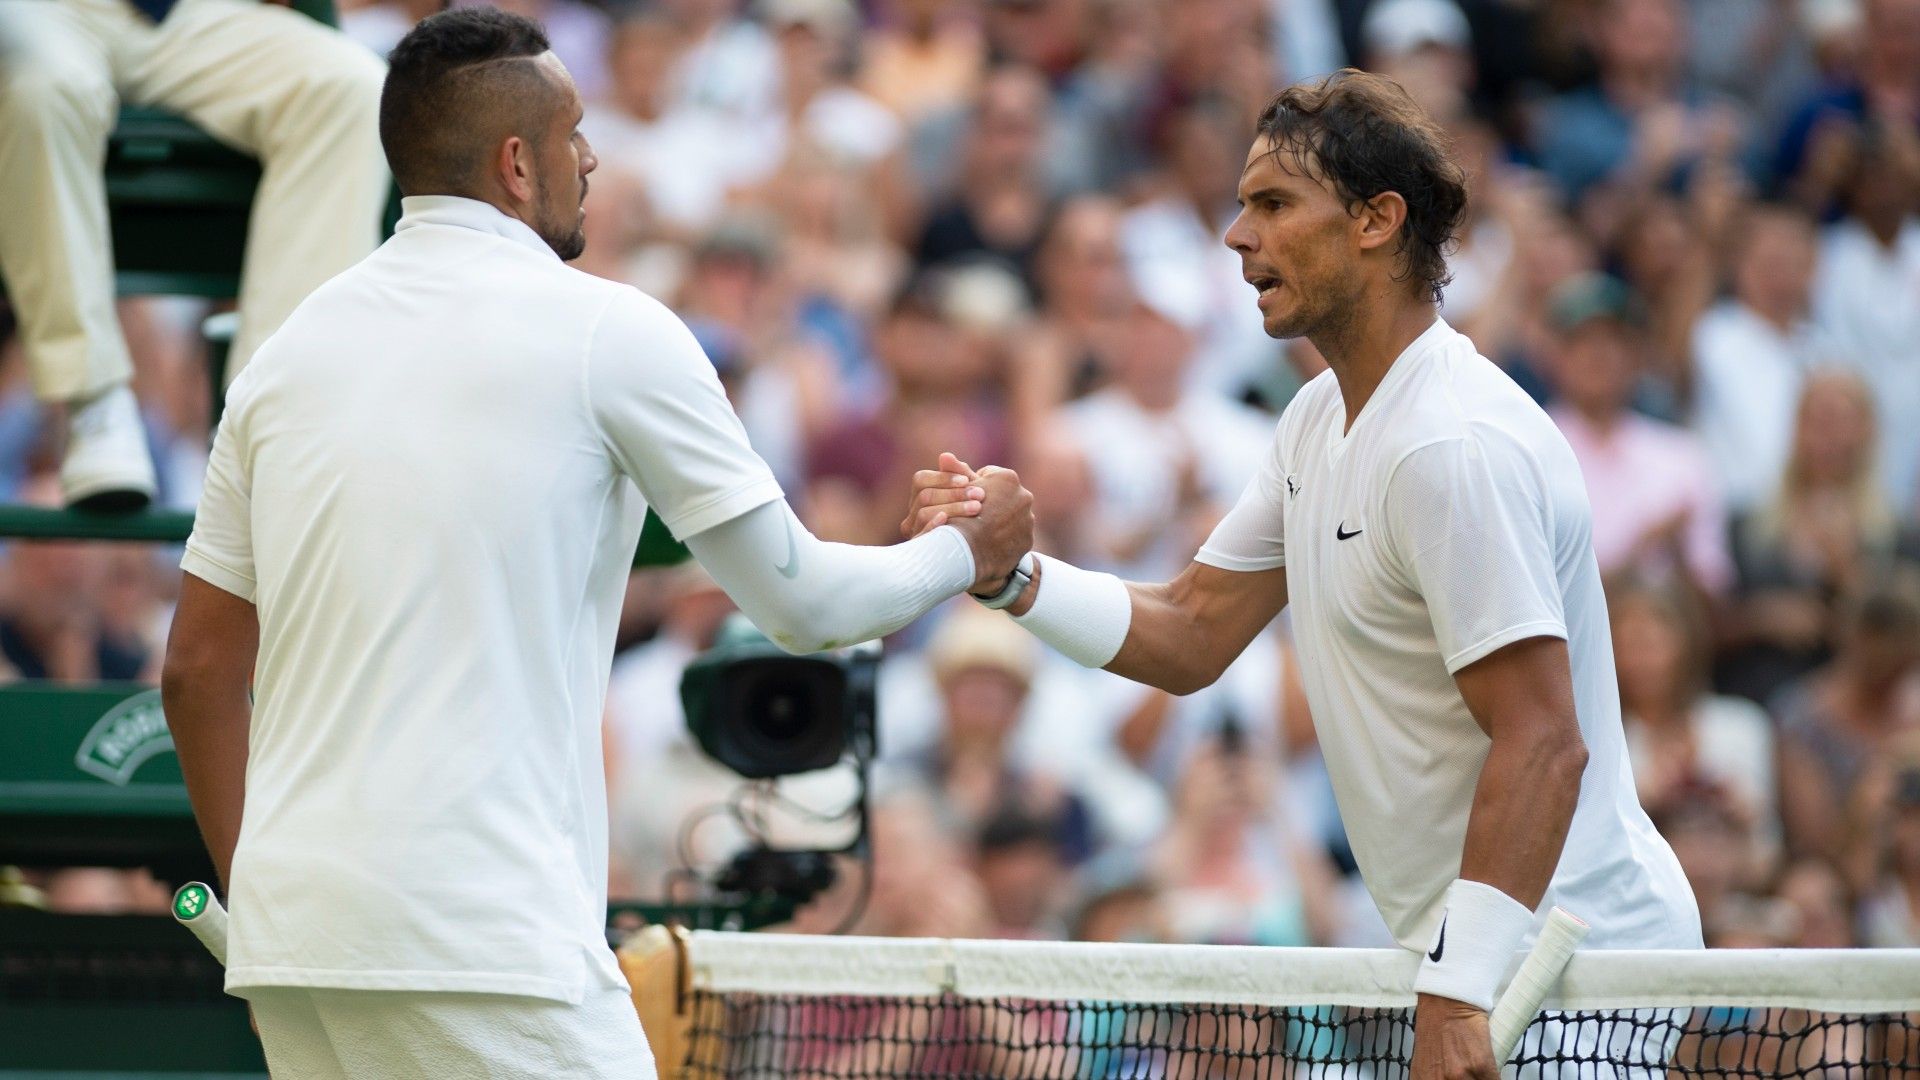 Nick Kyrgios reflects on 4am night out in pub before Wimbledon clash with Rafael Nadal